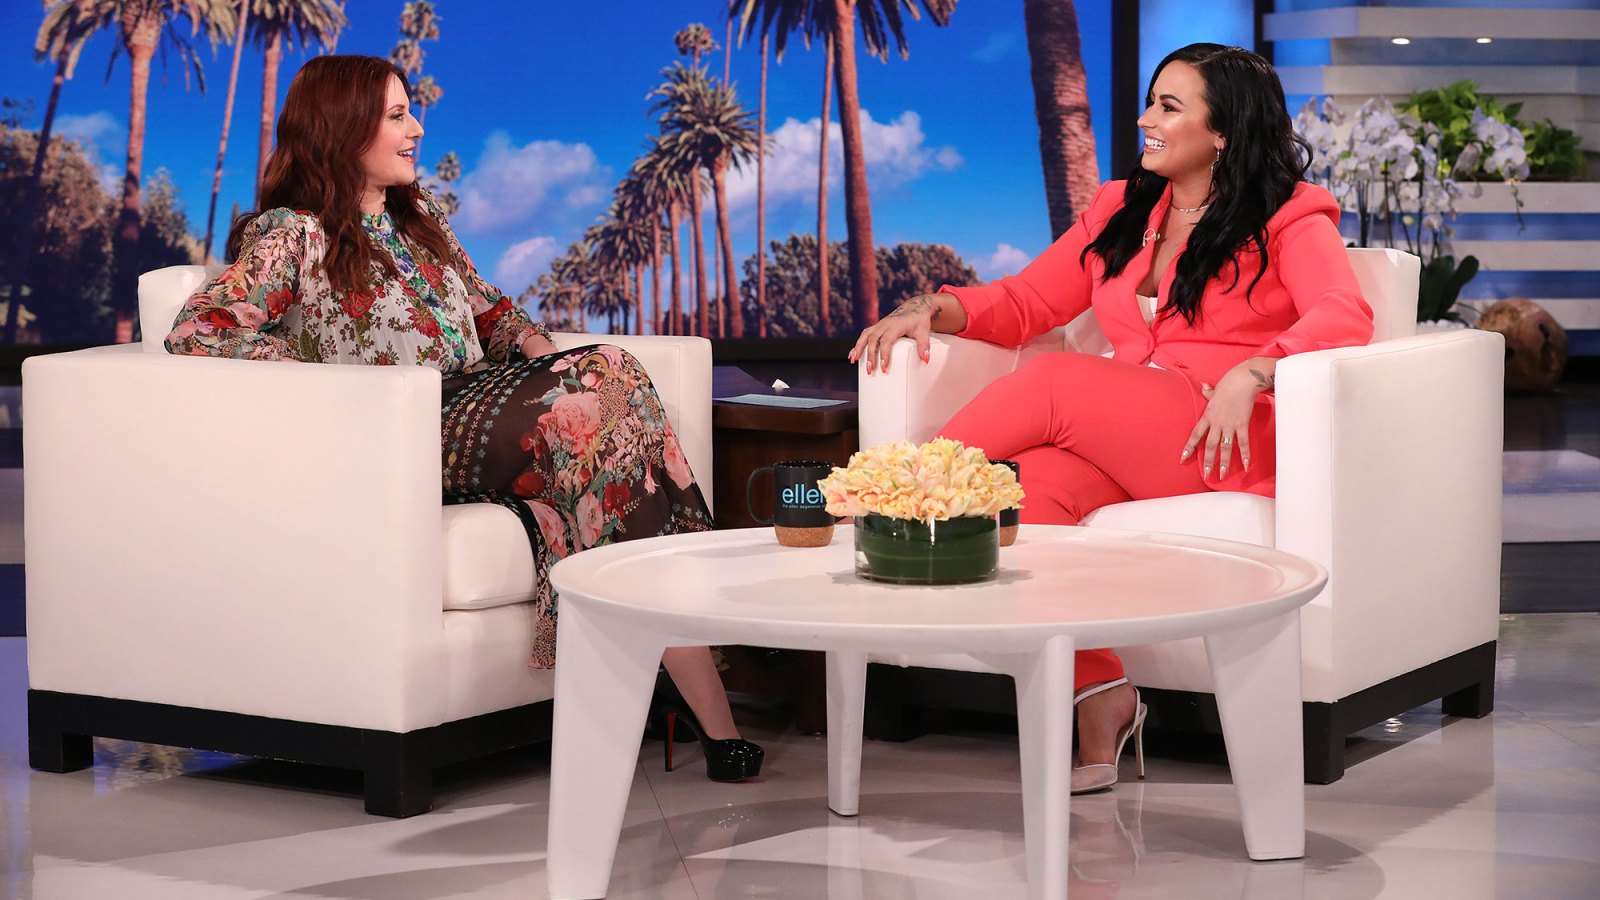 Demi Lovato and Megan Mullally Reveal Who They Want to Win Bachelor Ellen Show